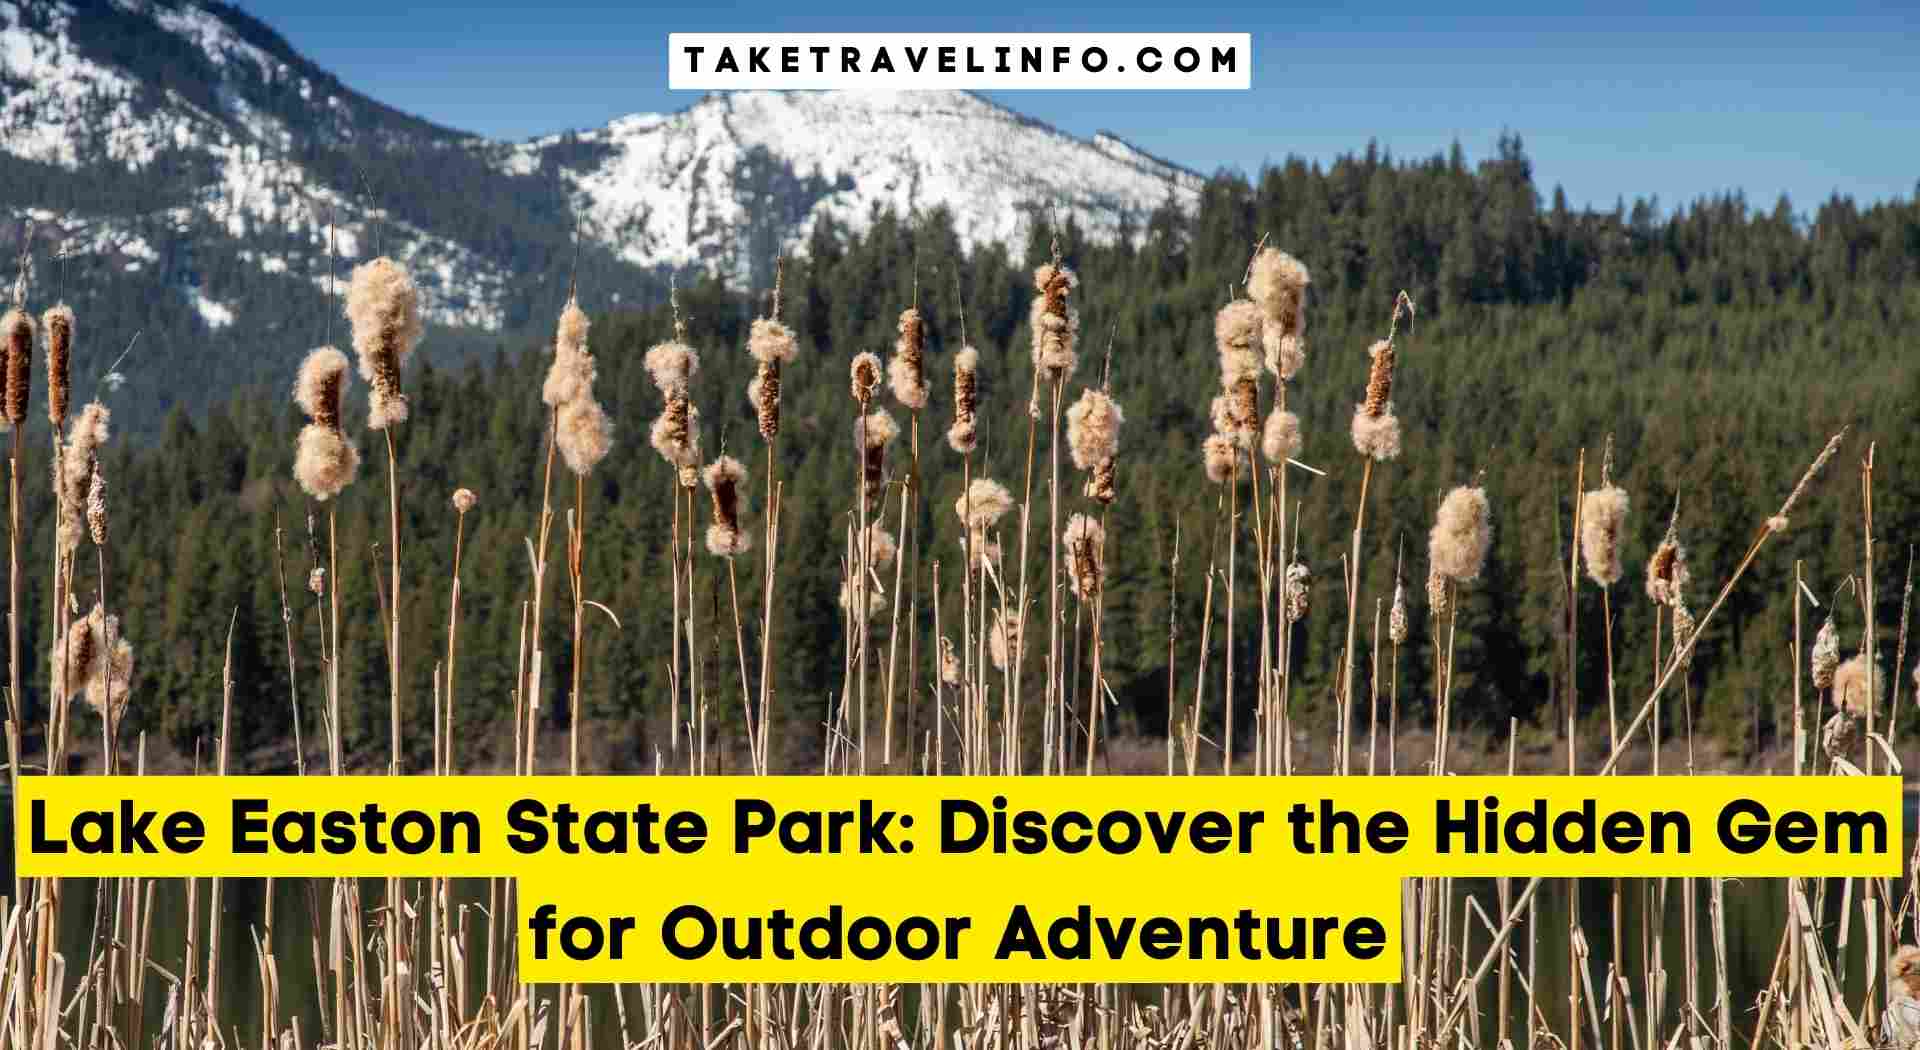 Lake Easton State Park: Discover the Hidden Gem for Outdoor Adventure